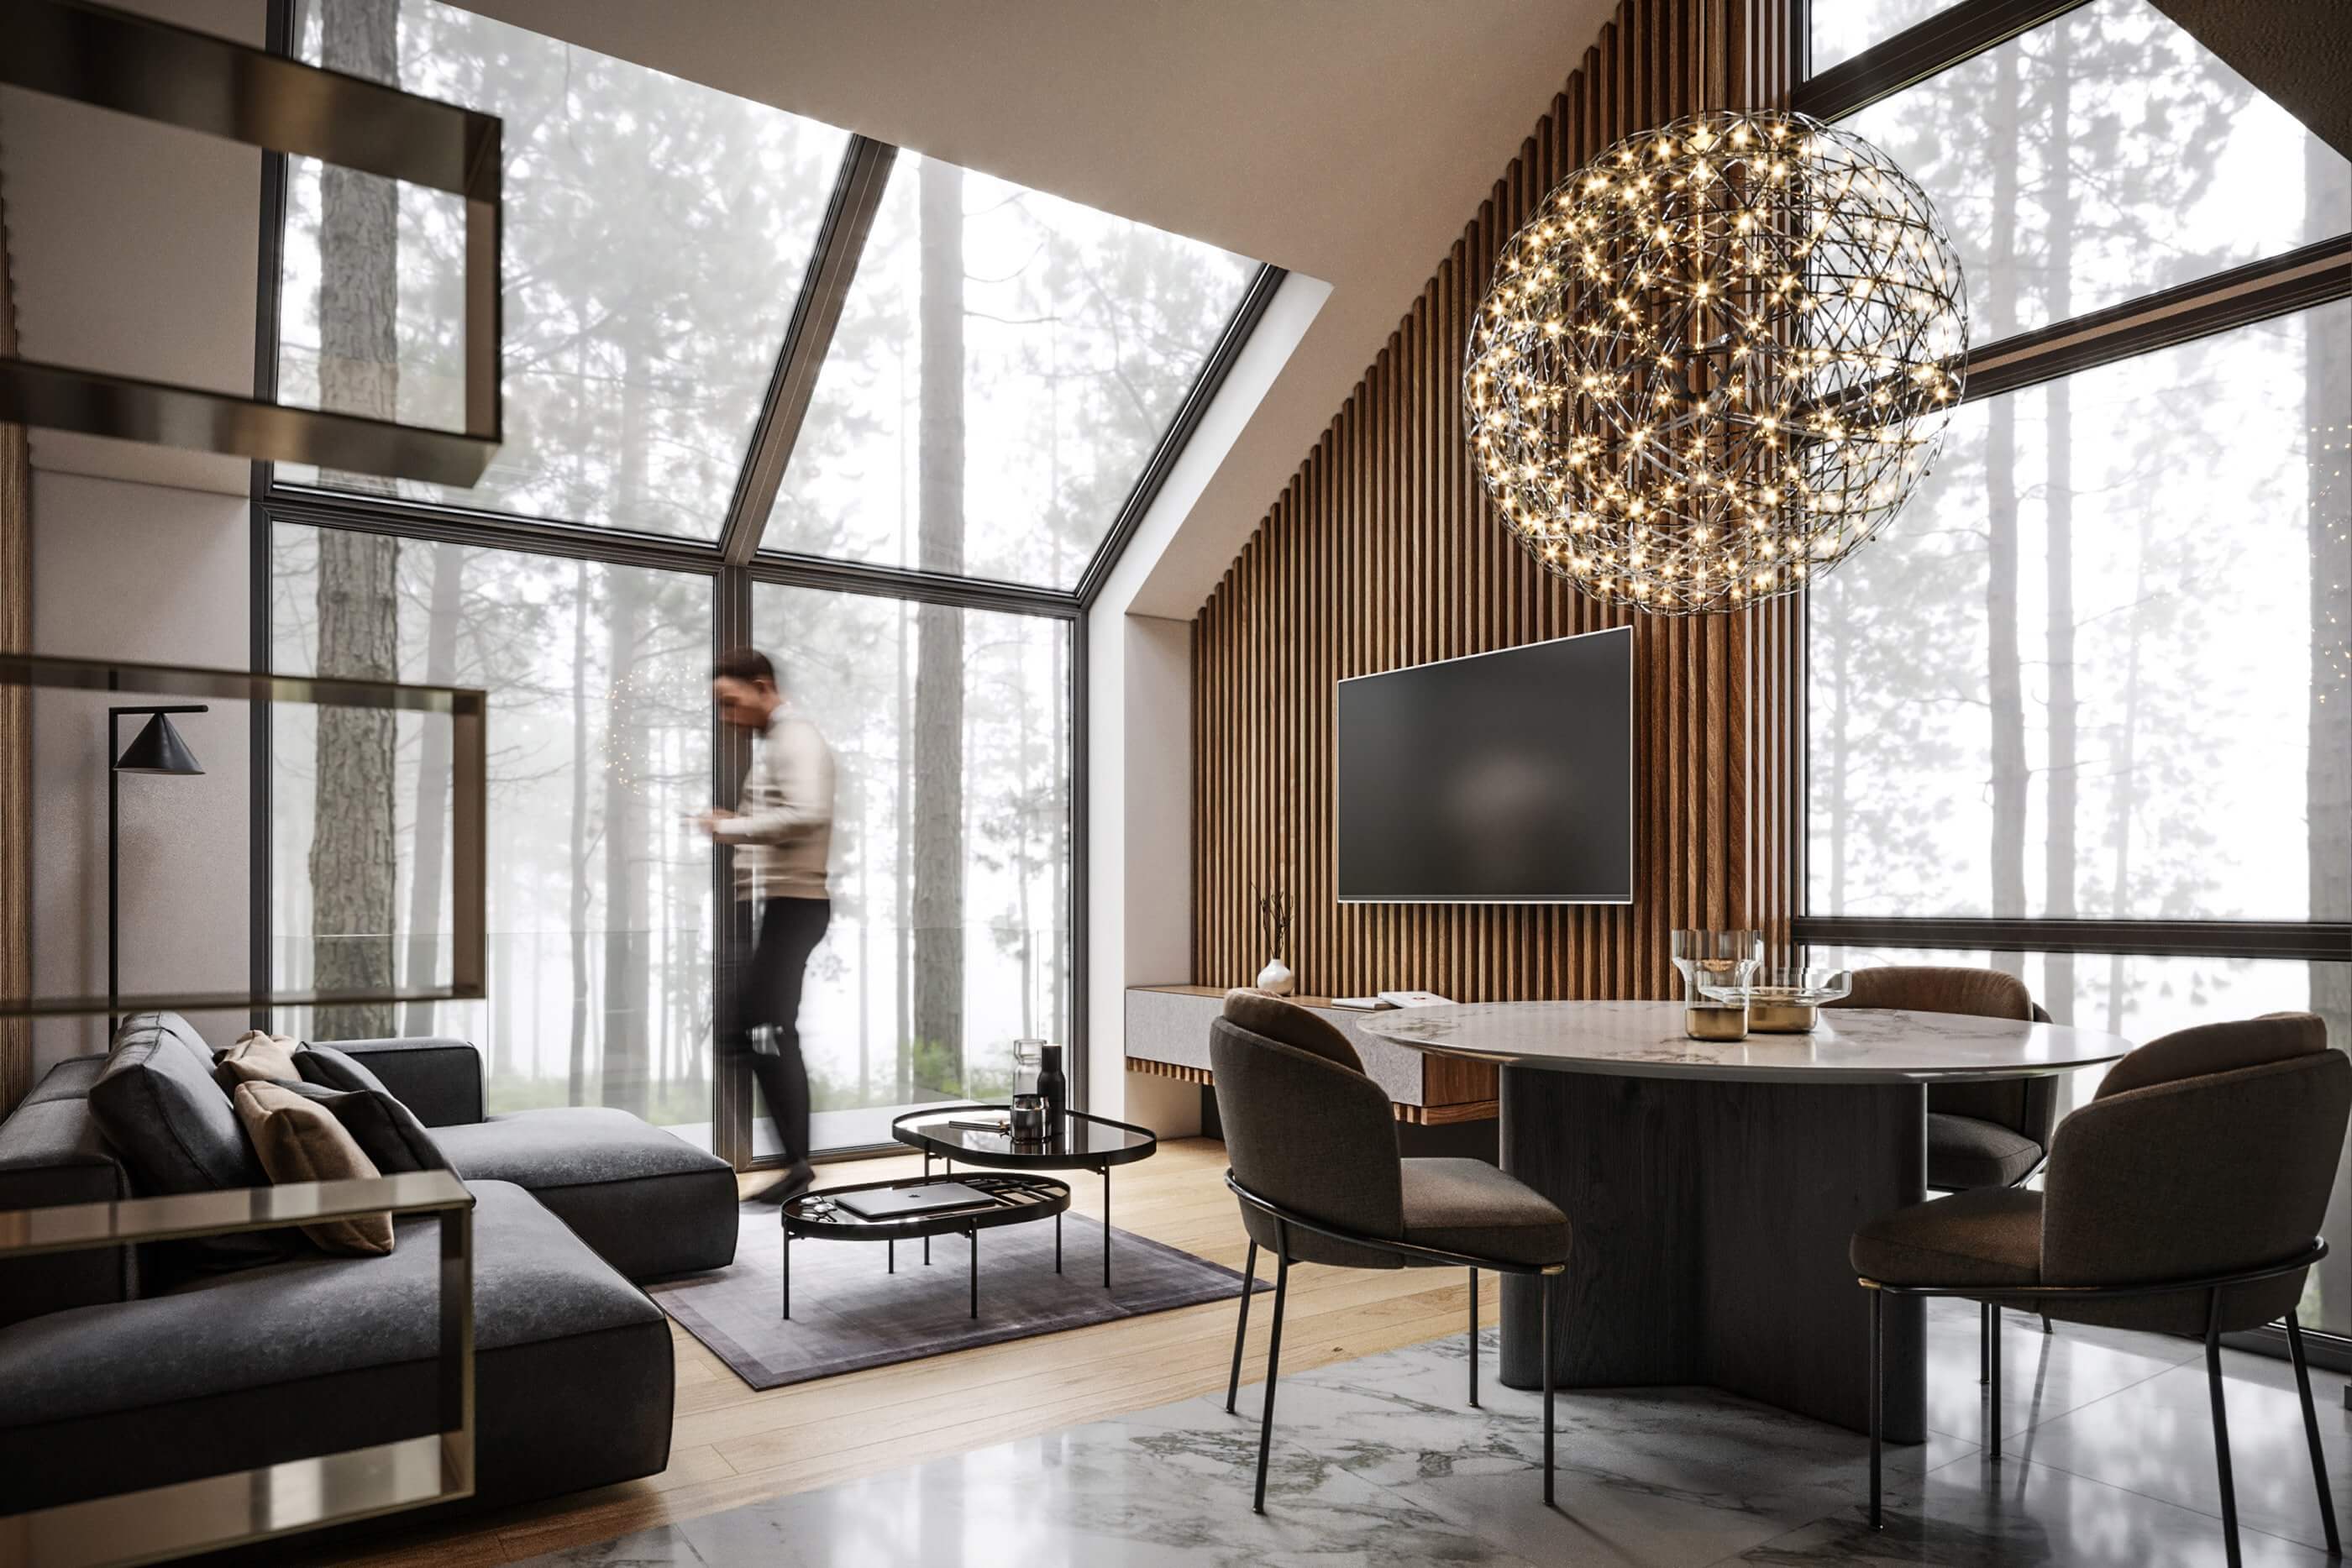 Cozy & modern apartment in the forest living room dining area - cgi visualization